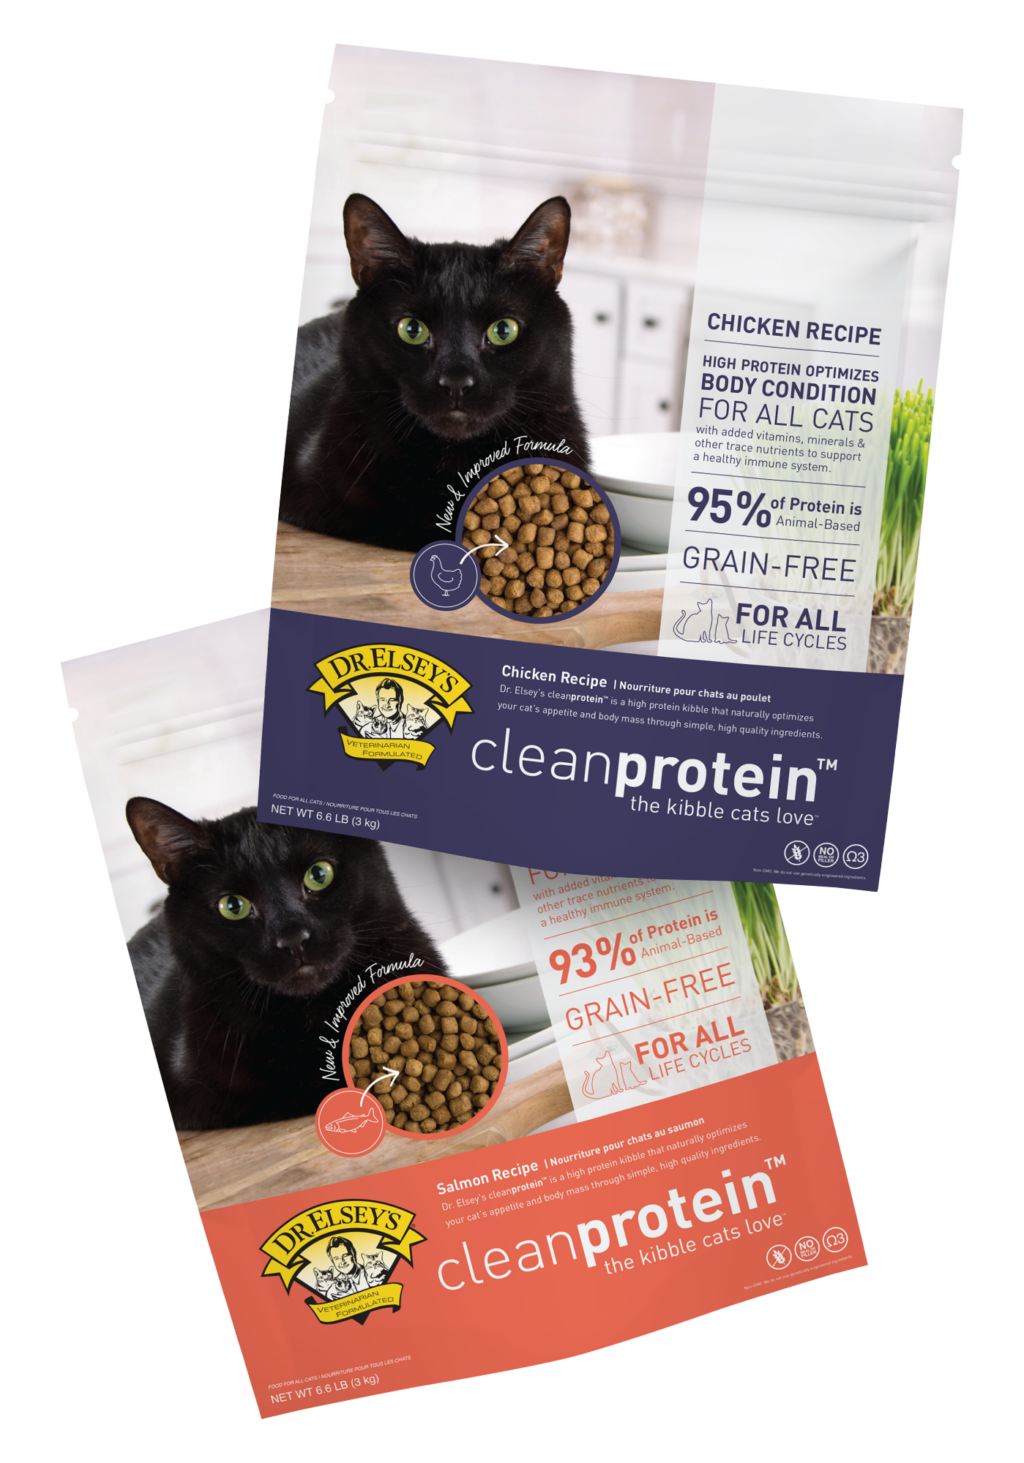 Dr. Elsey's cleanprotein™